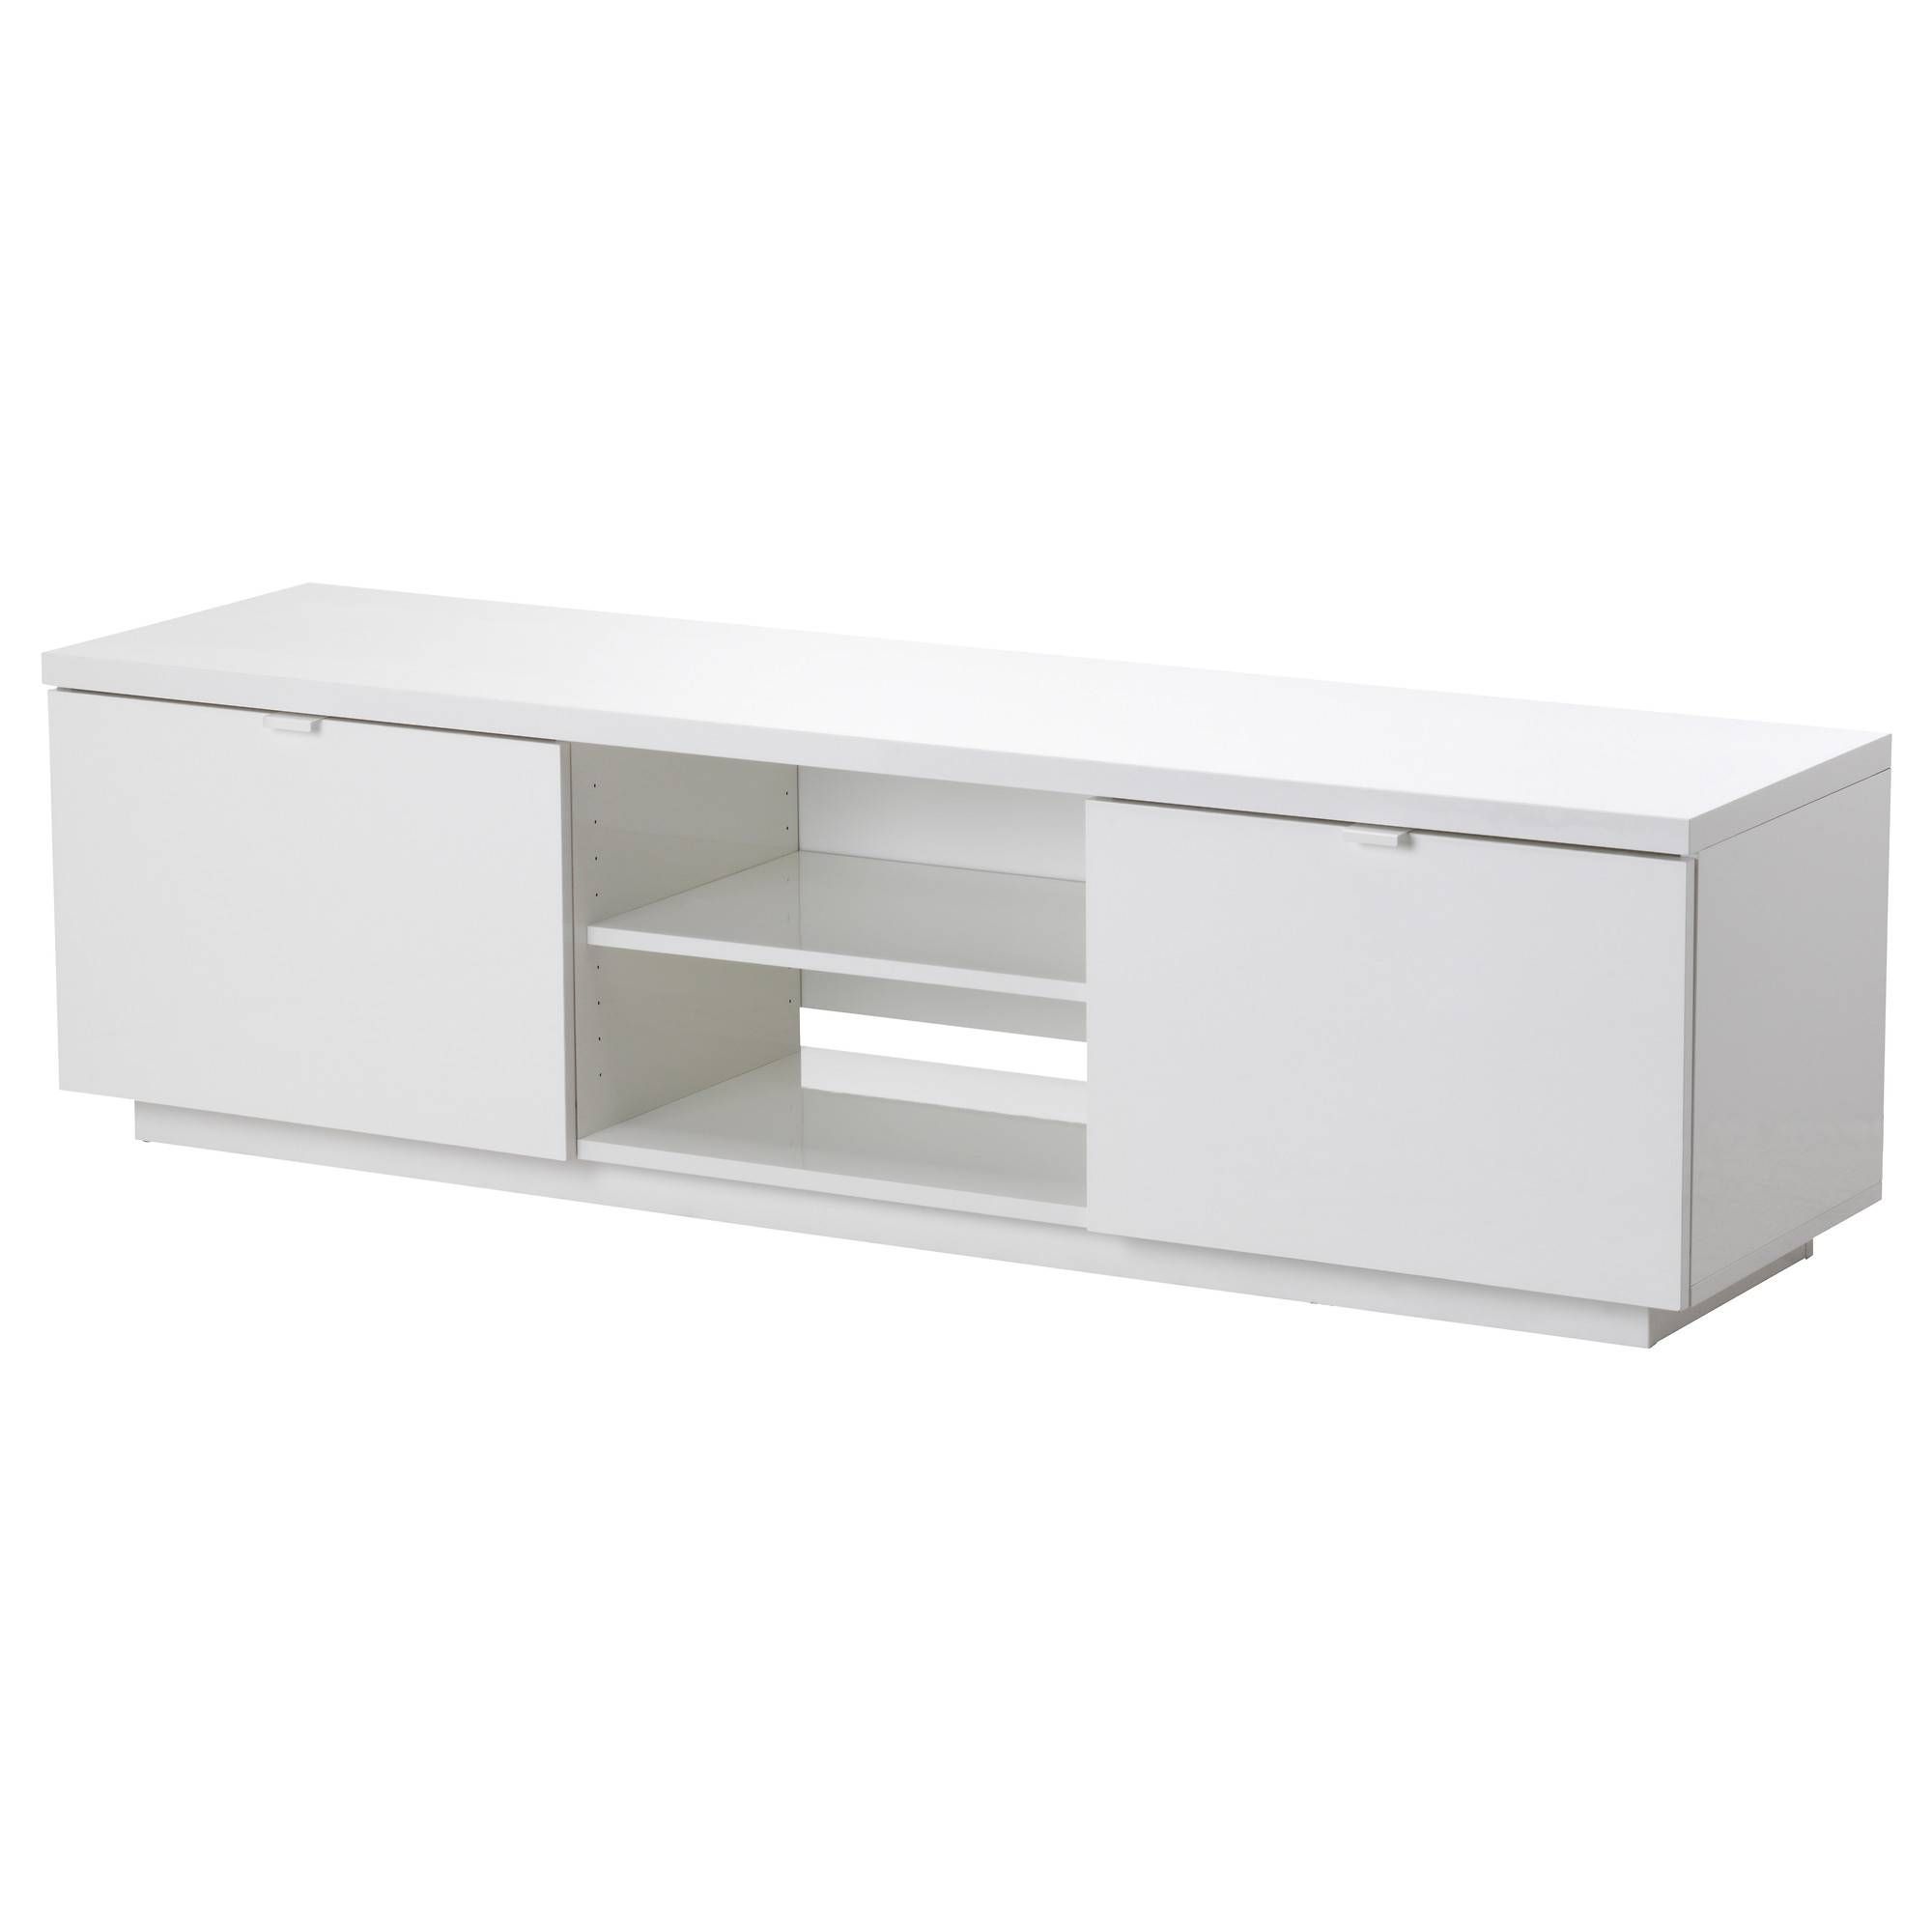 Tv Stands & Tv Units | Ikea Inside White Glass Tv Stands (View 14 of 15)